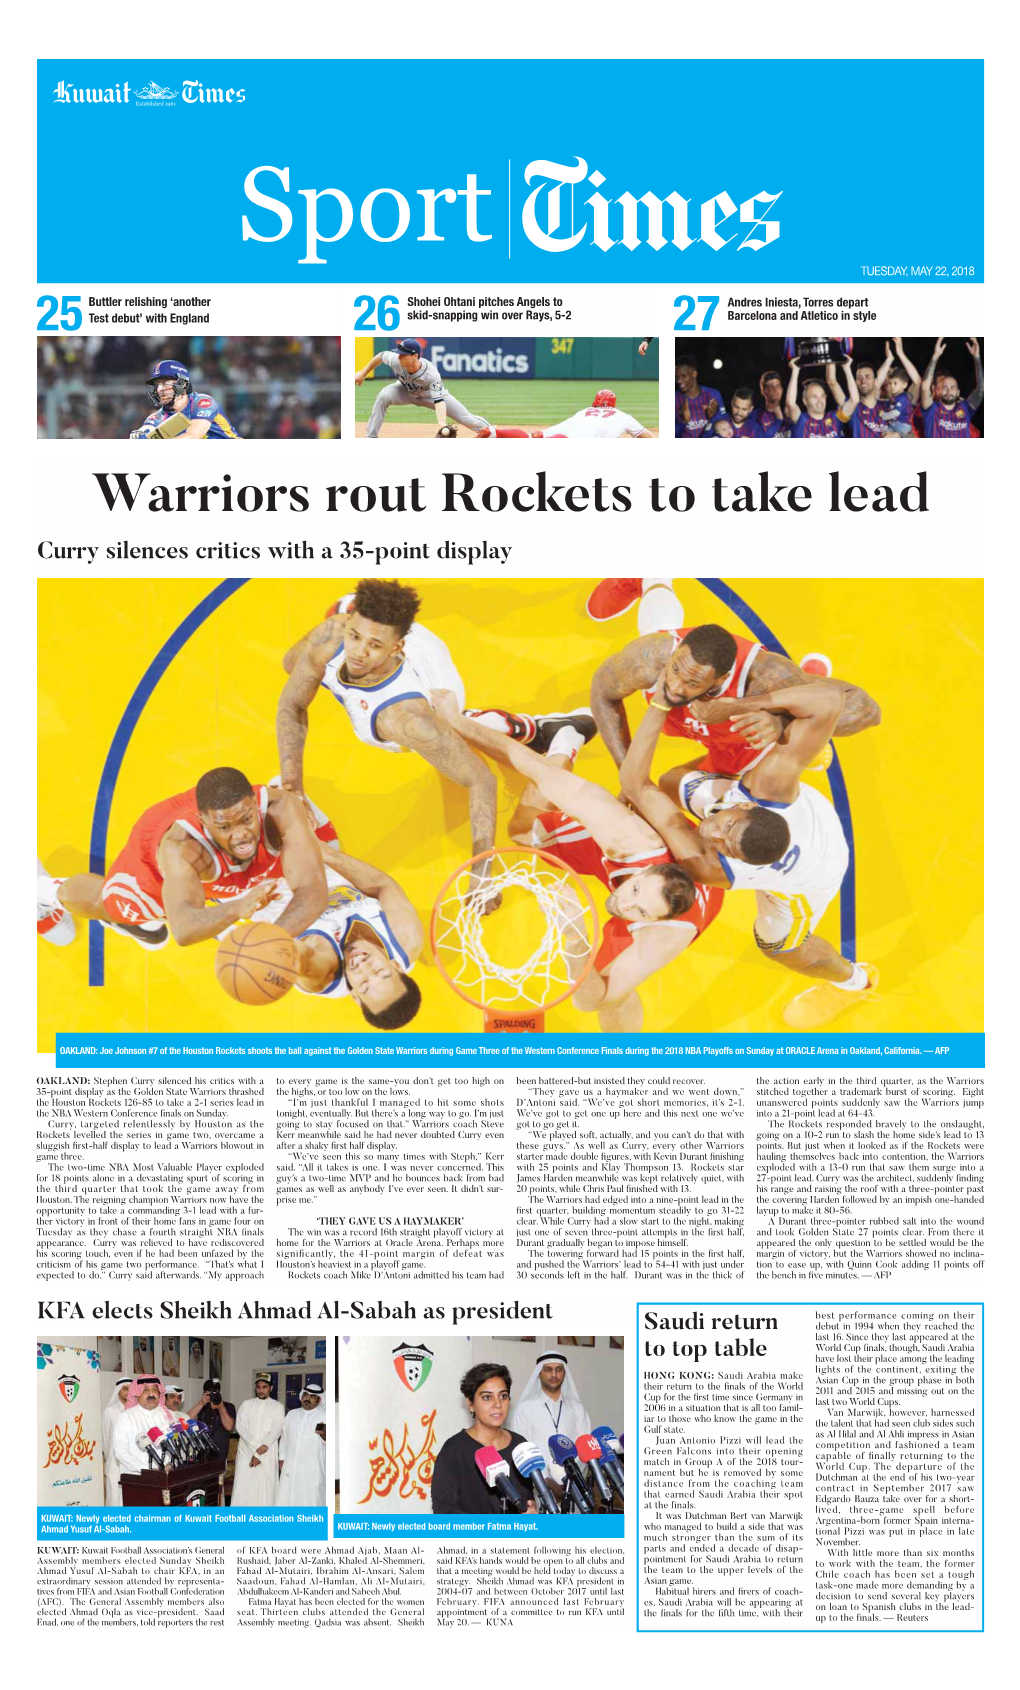 Warriors Rout Rockets to Take Lead Curry Silences Critics with a 35-Point Display